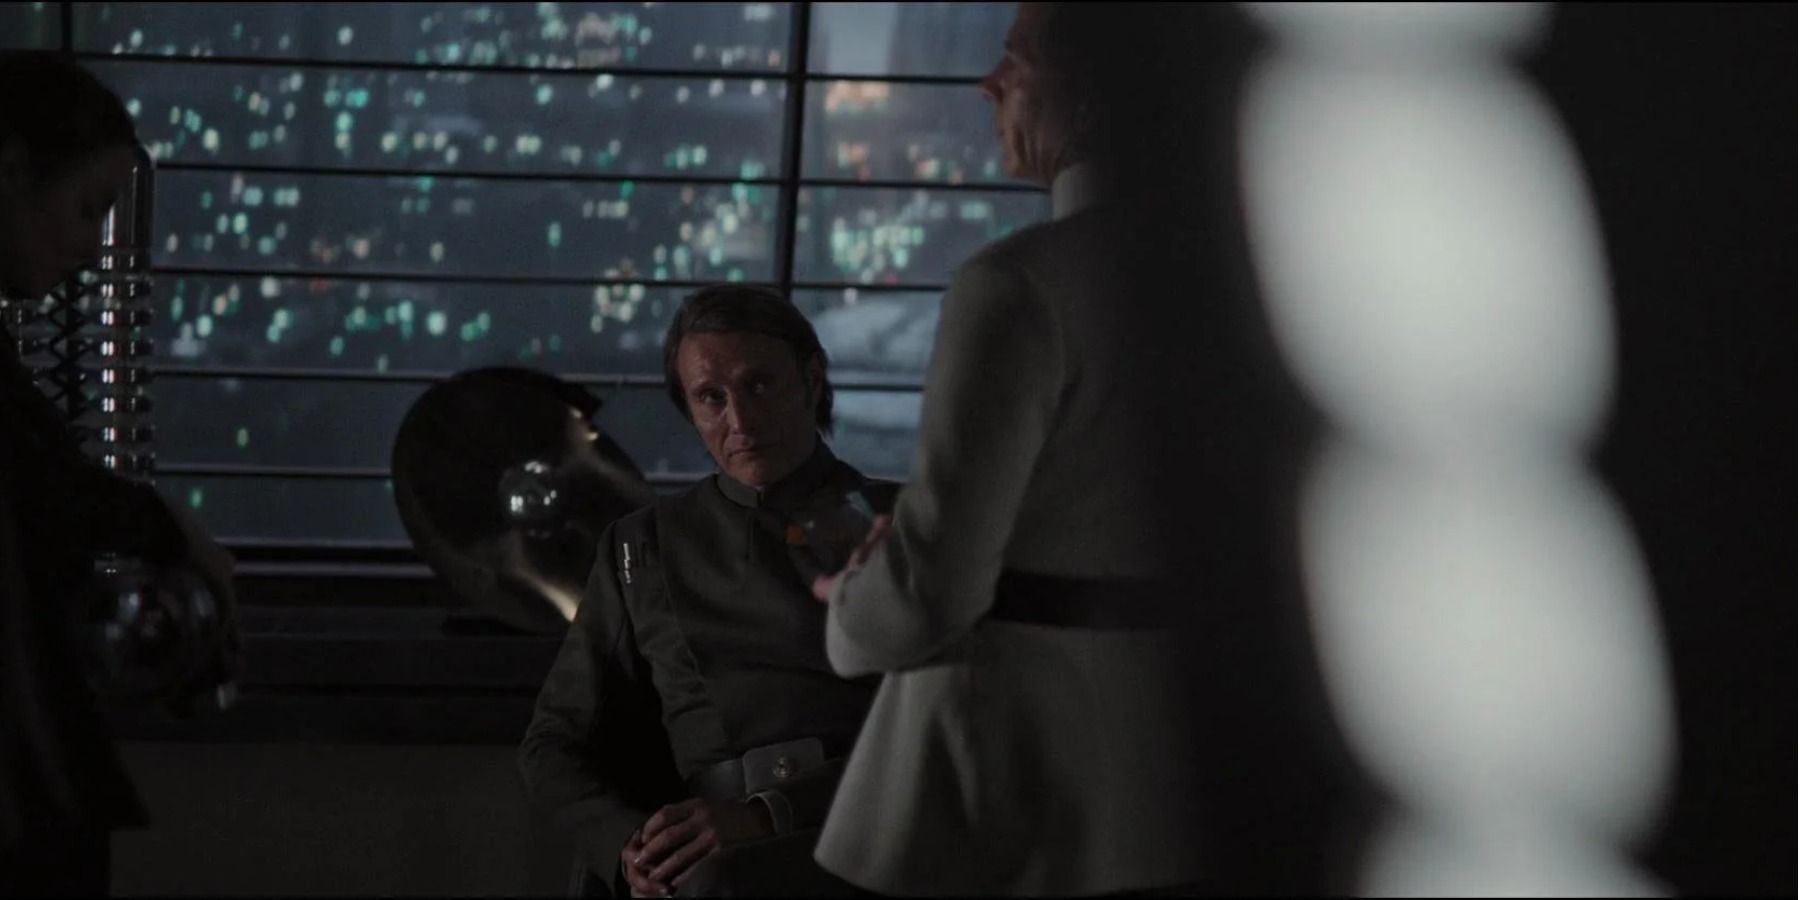 Rogue One flashbacks on Coruscant as Jyn Erso watches her father Galen Erso, her mother Lyra Erso, and Orson Krennic